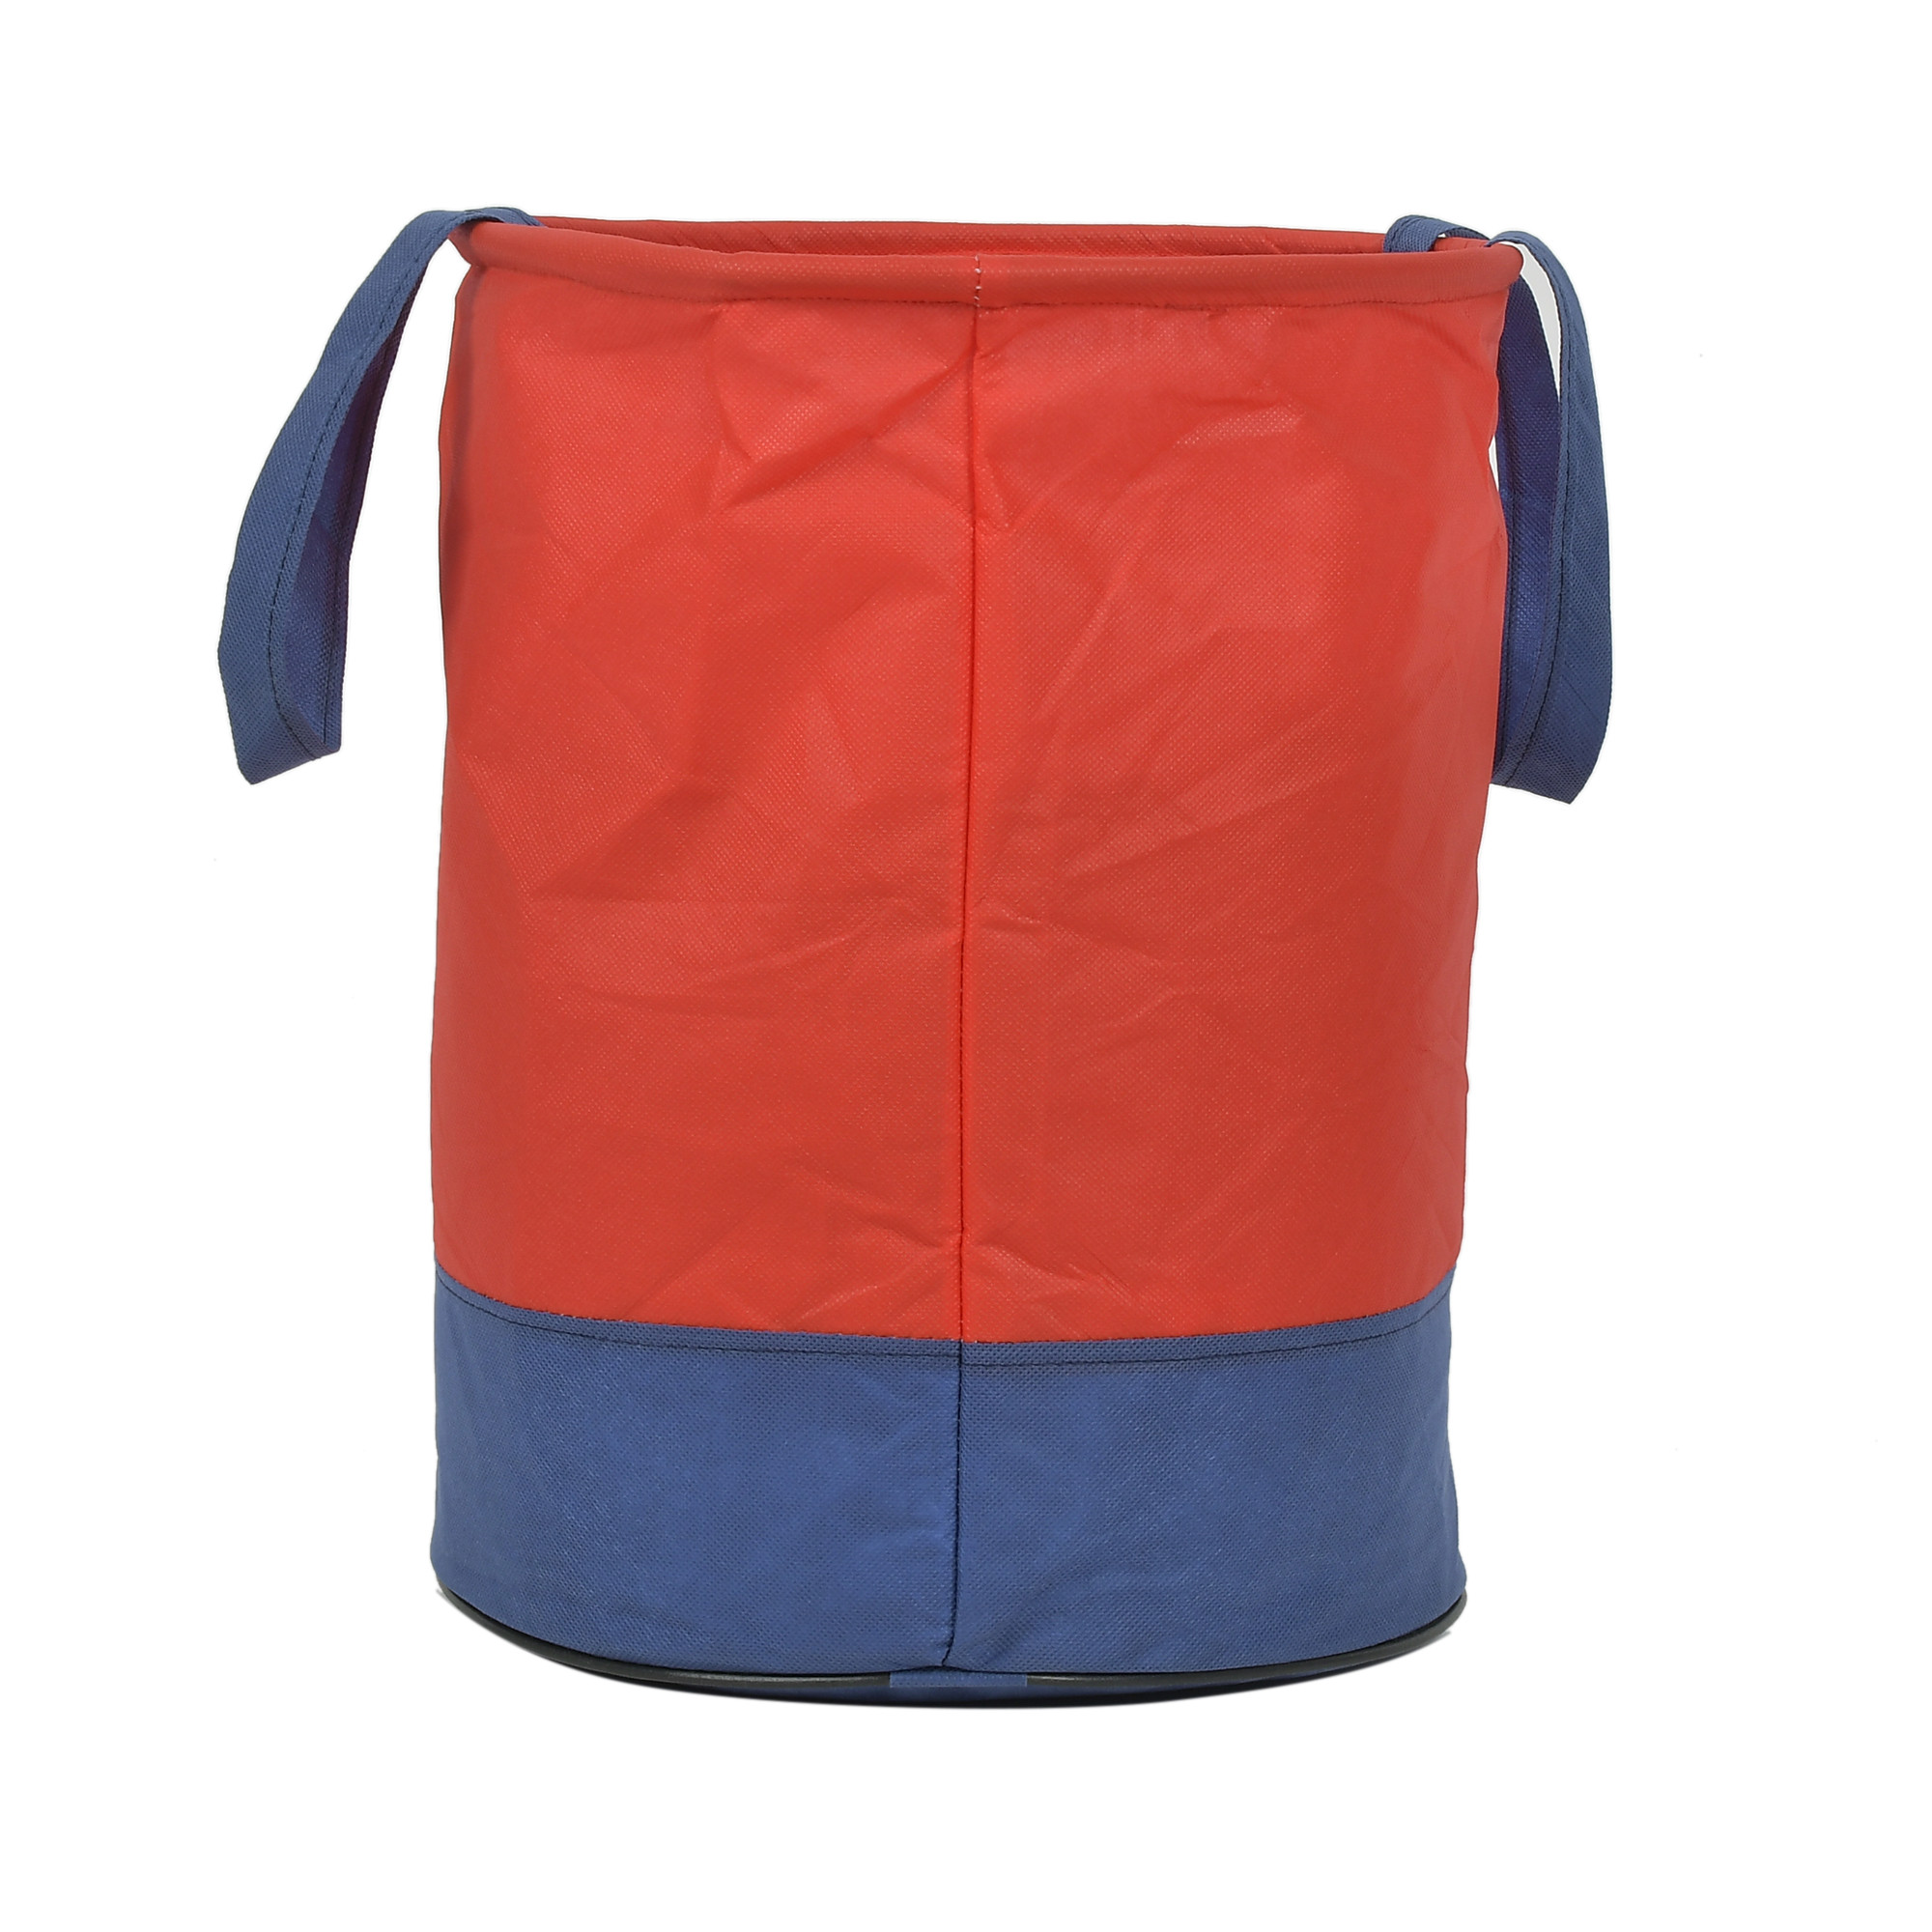 Kuber Industries Laundry Bag for Clothes, Toys With Handles, 45L (Red & Blue)-HS43KUBMART25869